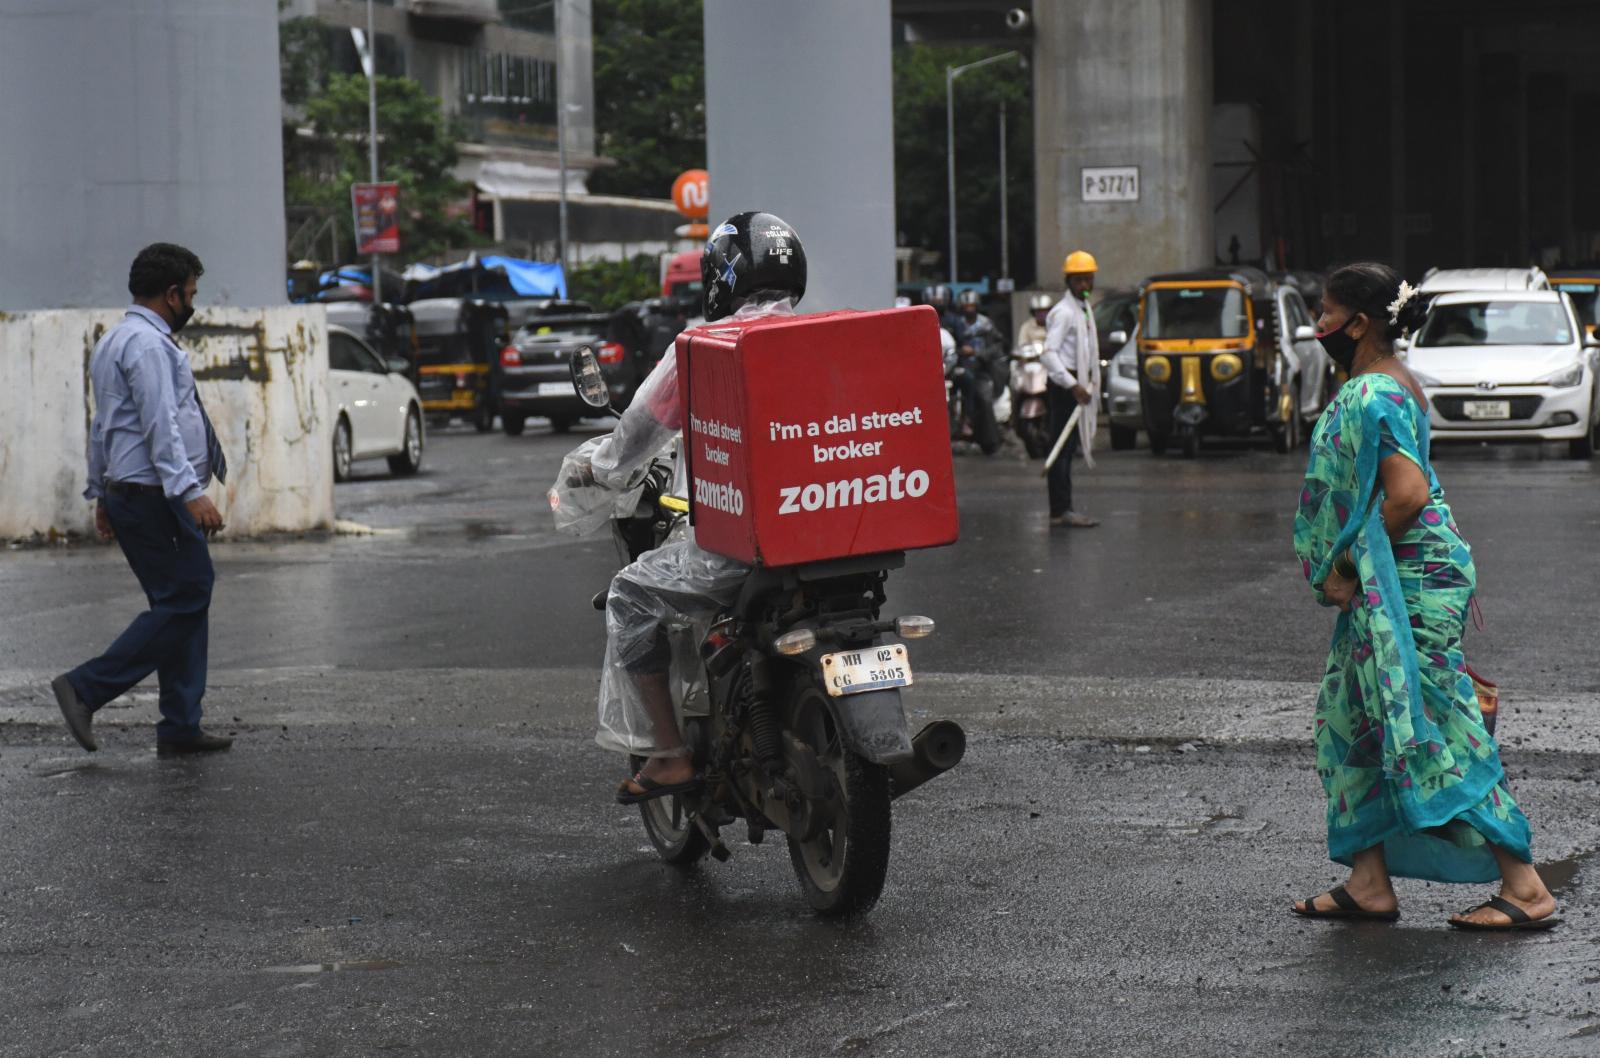 Zomato shares plunge after Invesco cut rival Swiggy’s valuation